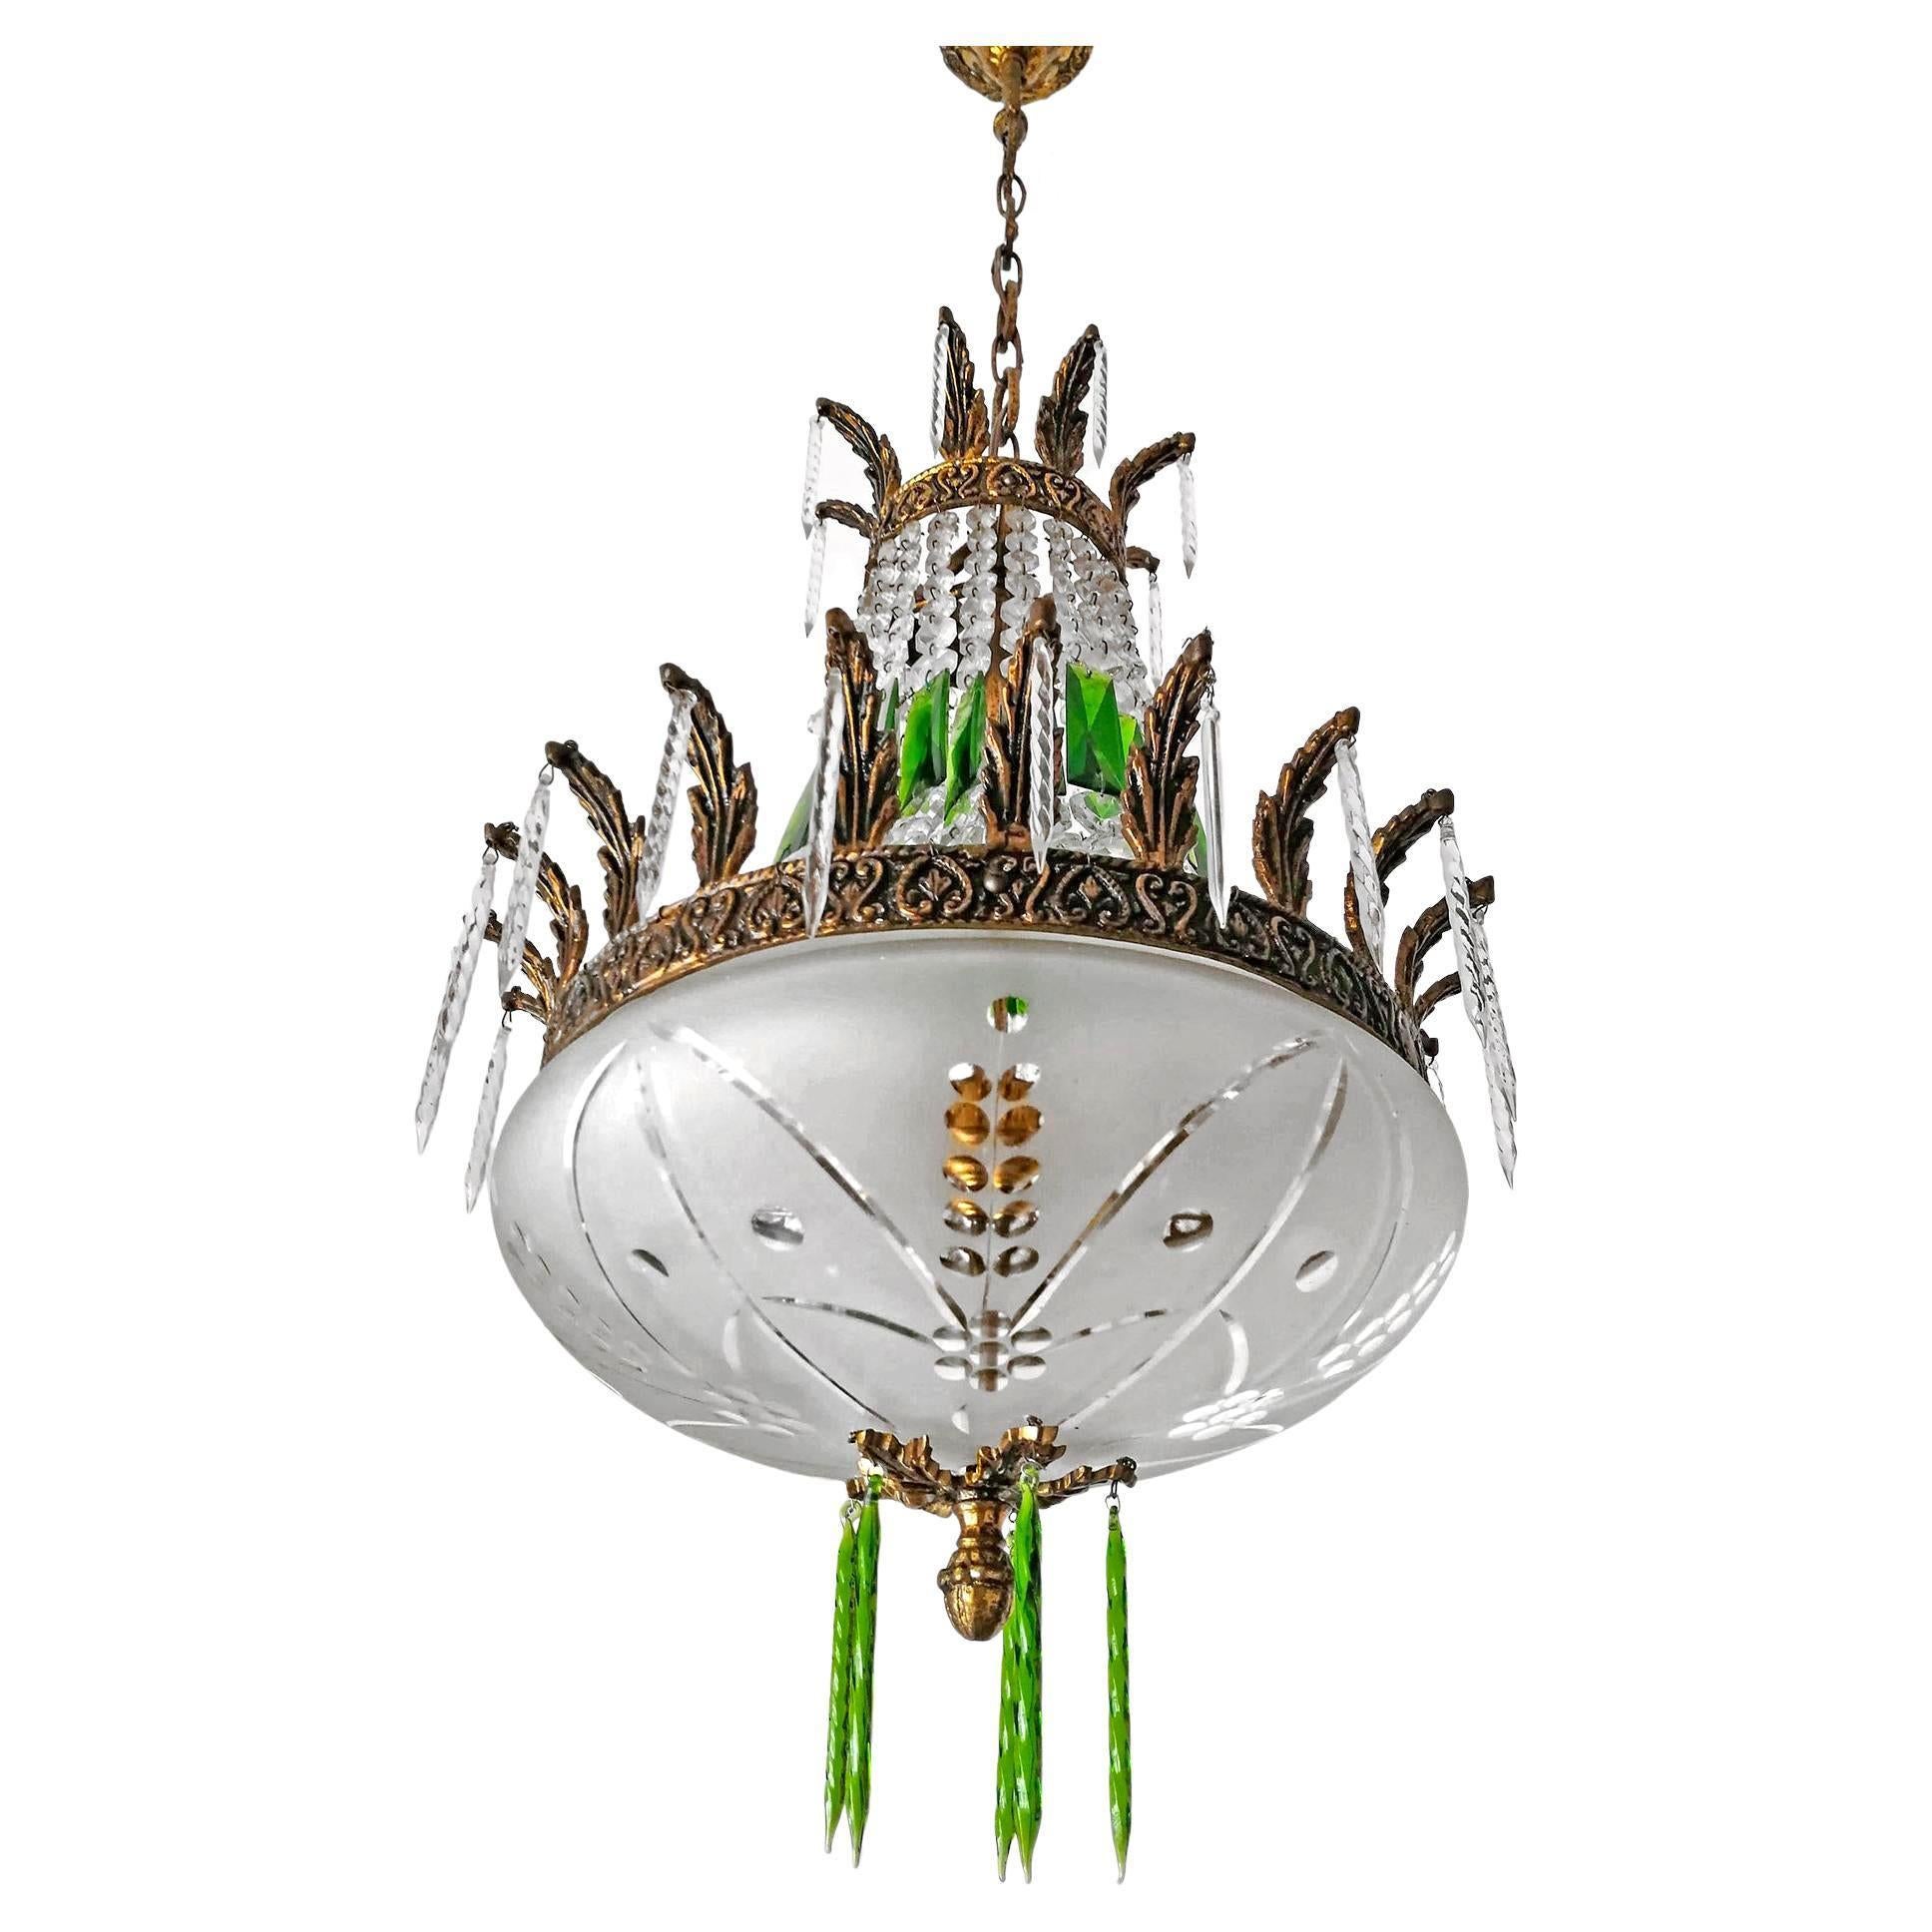 French Regency Empire Basket Chandelier Gilt Bronze and Green Cut Crystal & Bowl In Good Condition For Sale In Coimbra, PT